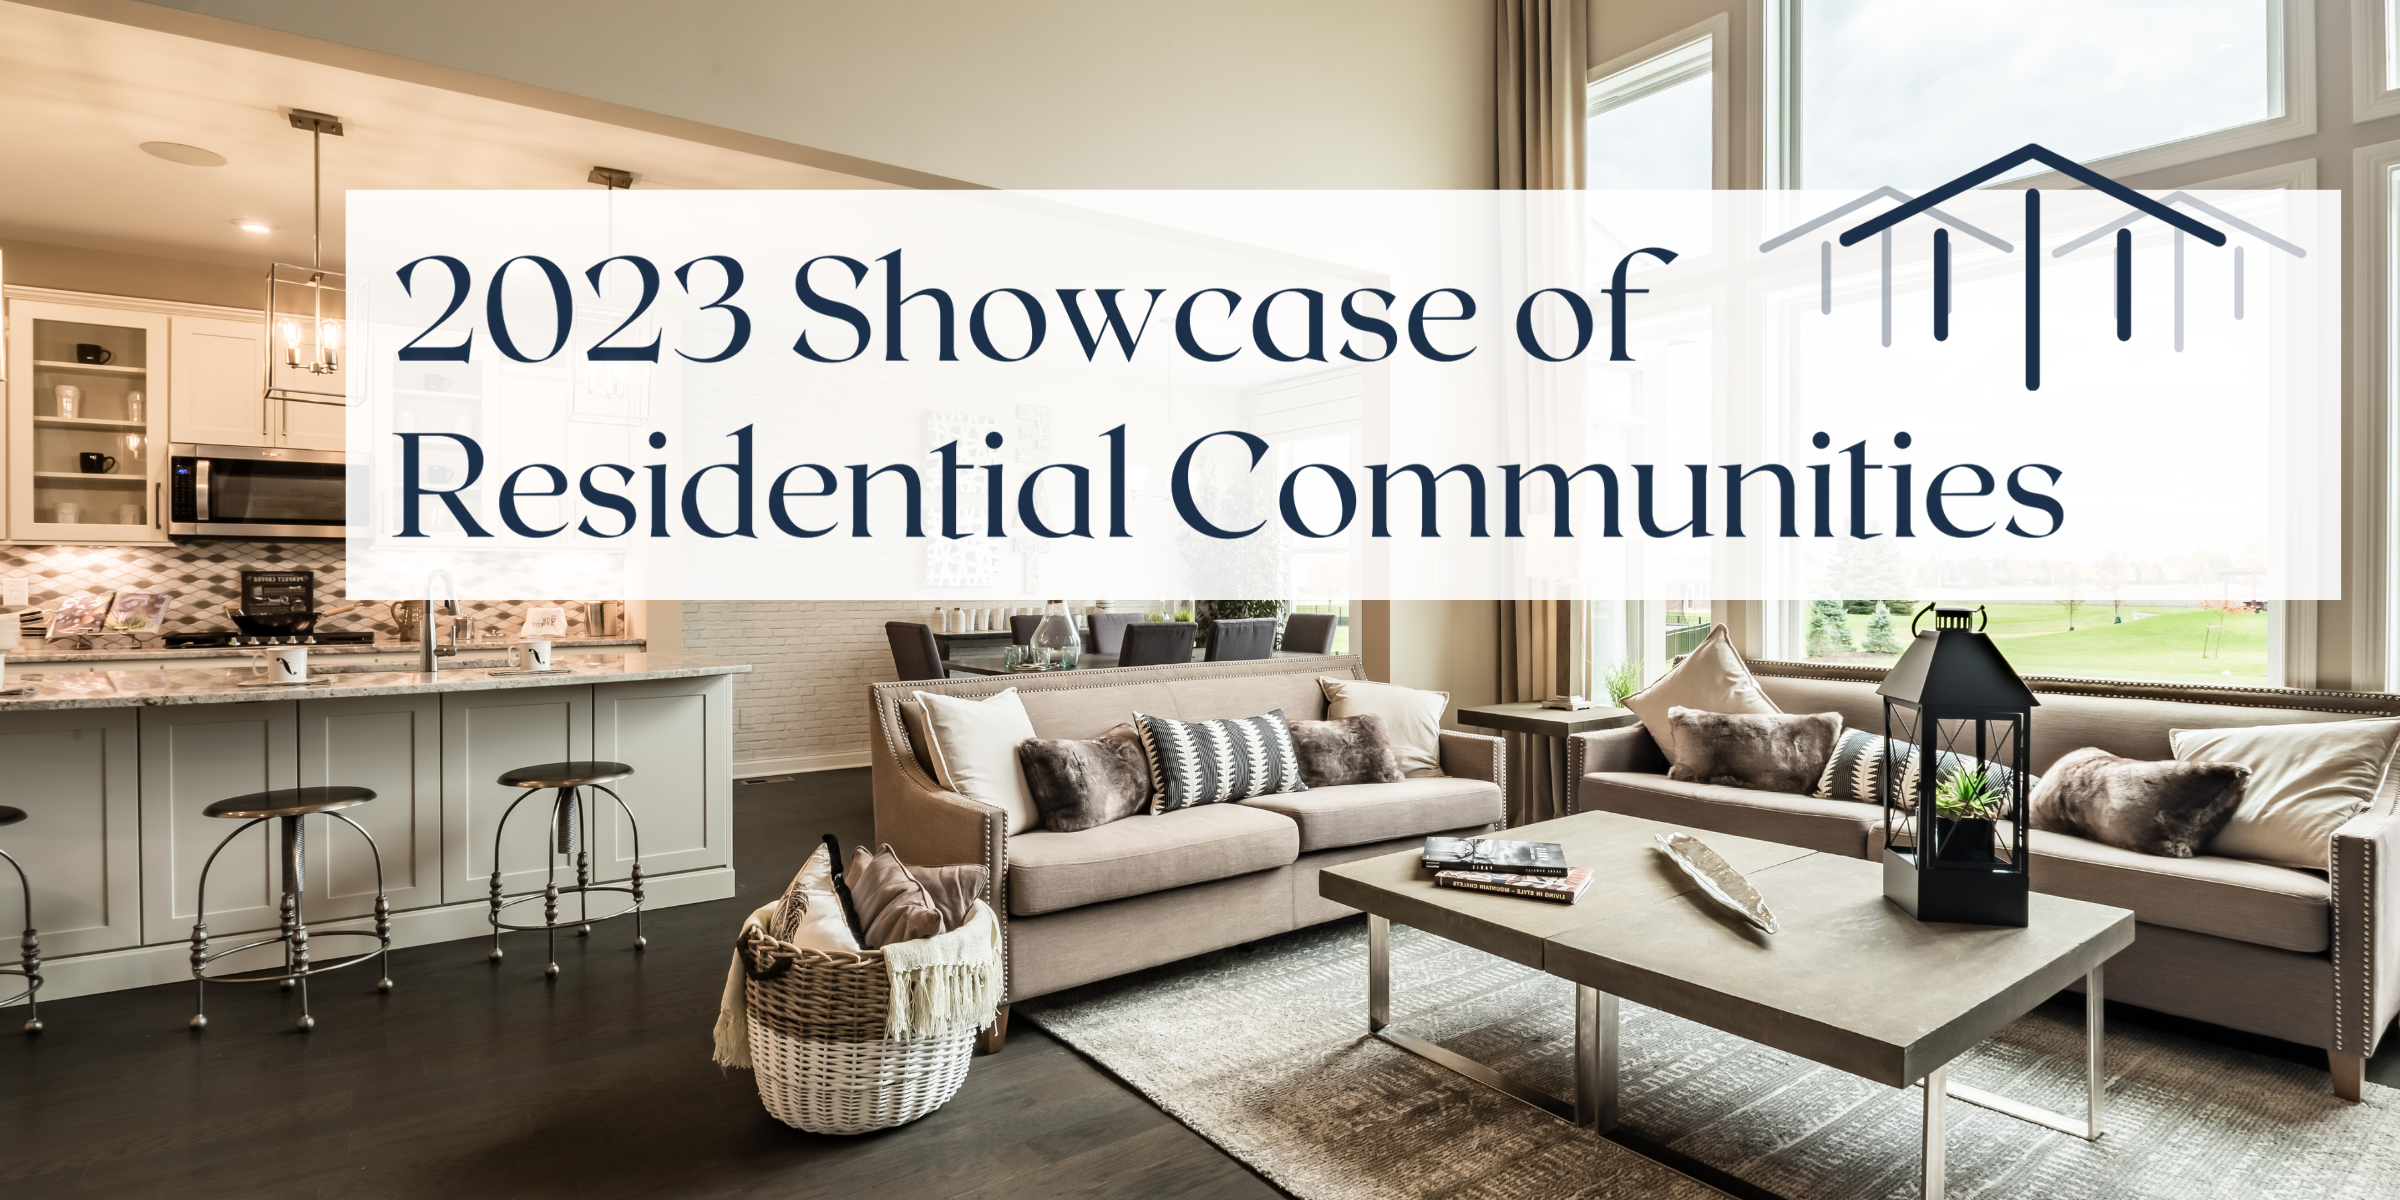 Tour YOUR Dream Home | Louisville Showcase of Residential Communities